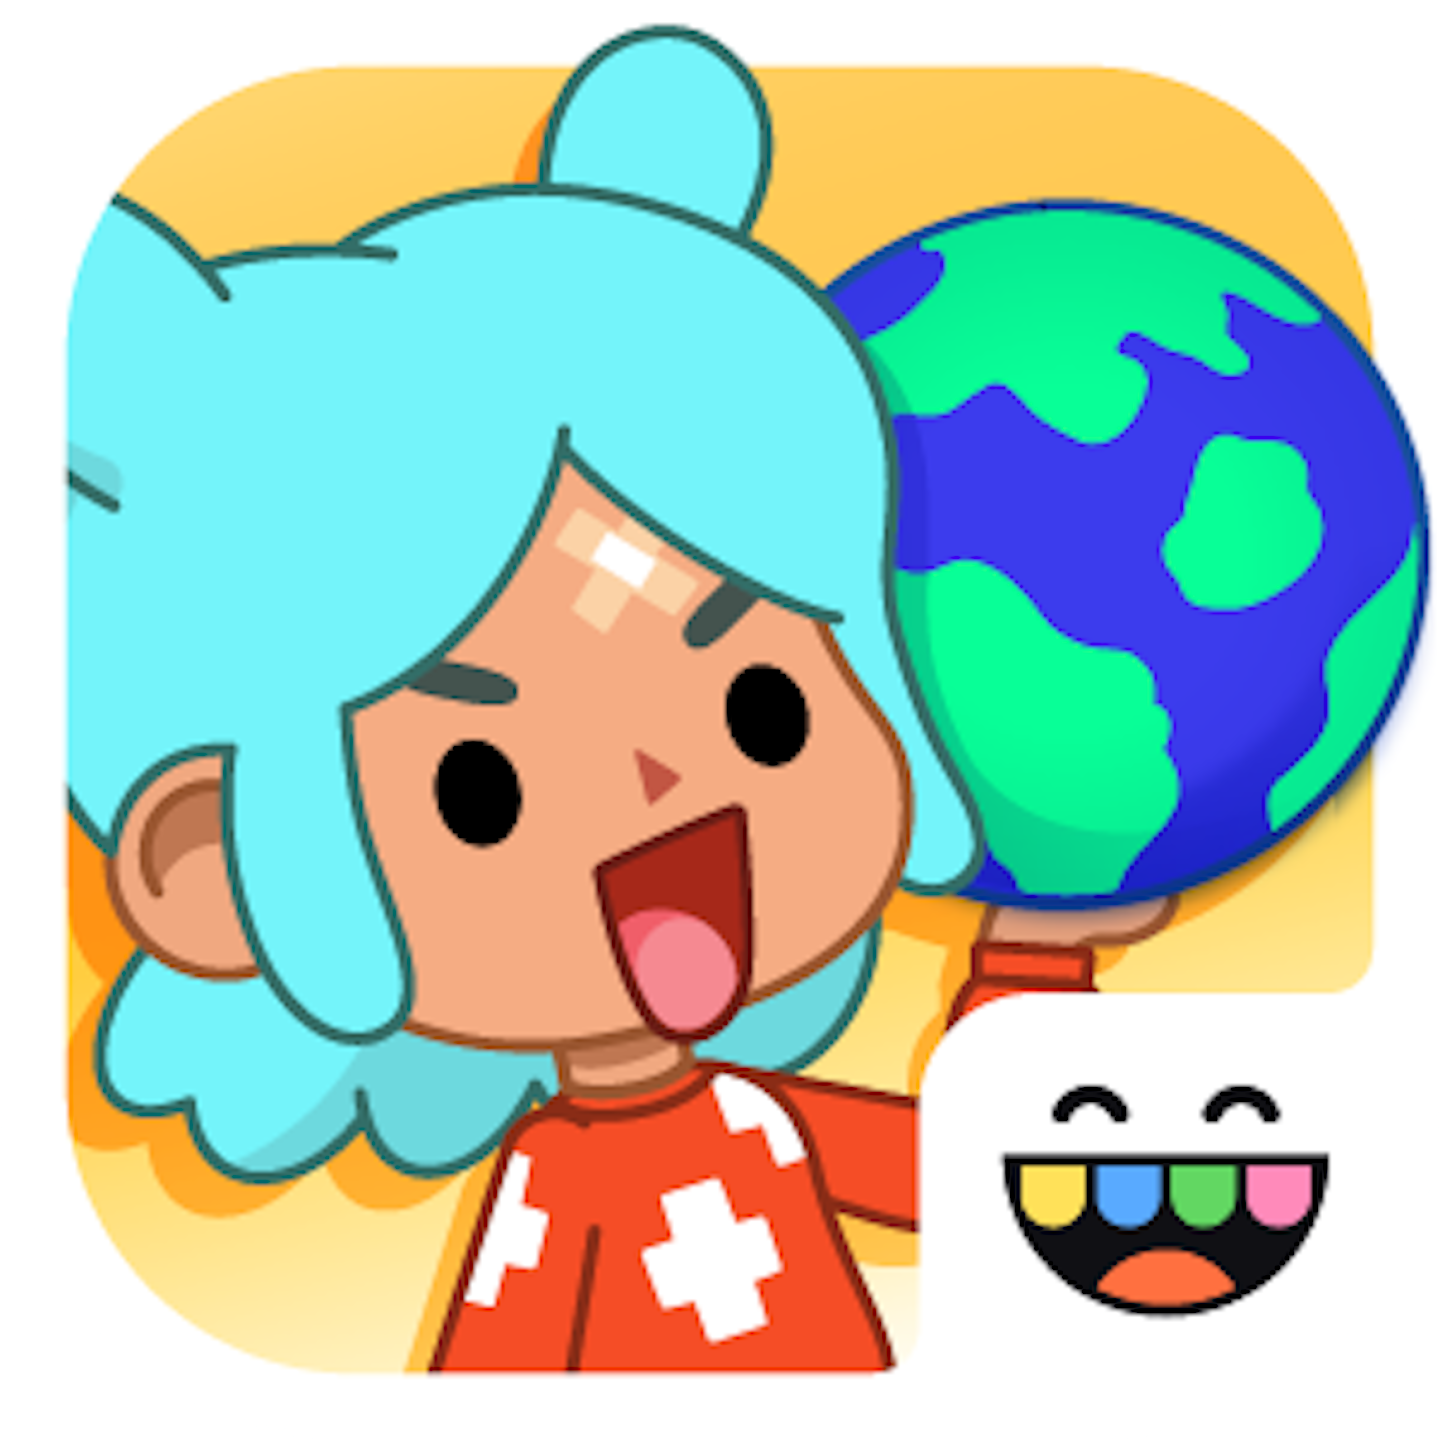 This is the app icon for the Toca Boca World app